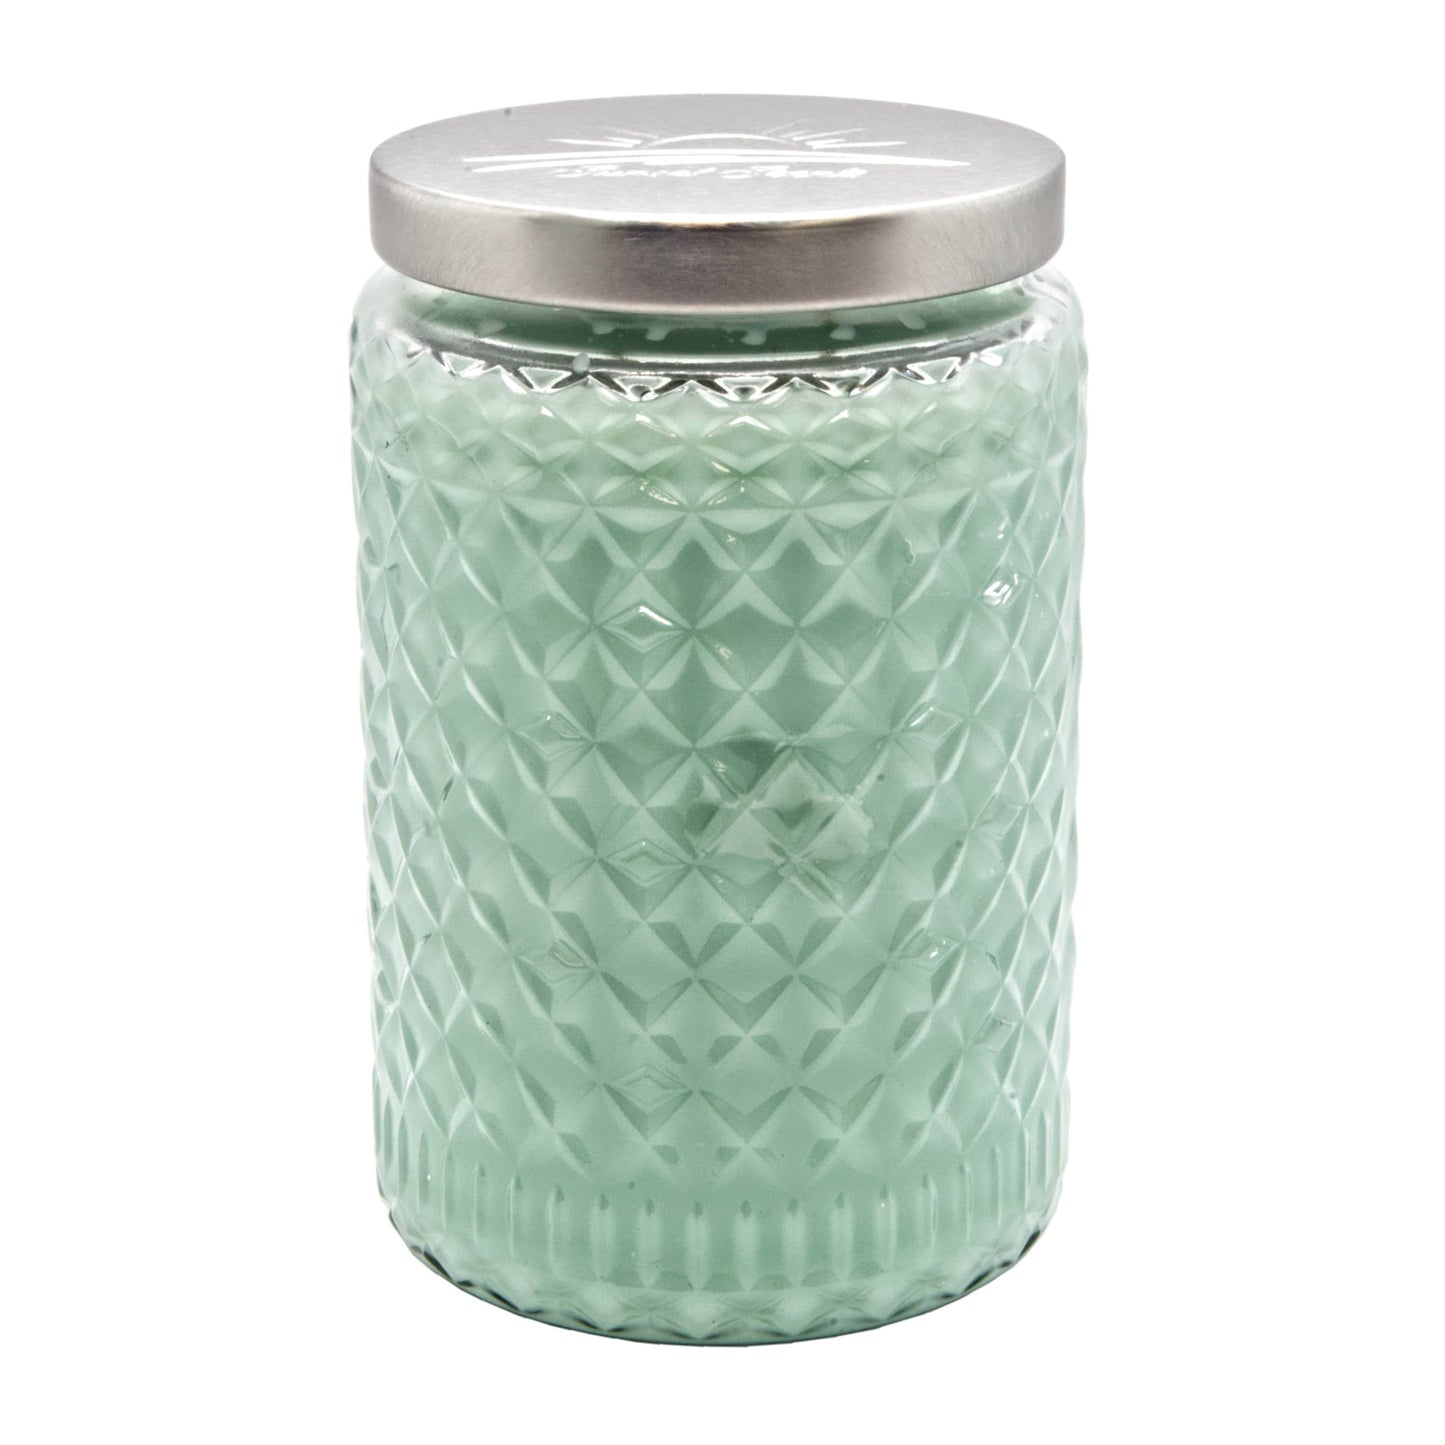 Cucumber Melon Scented Candle